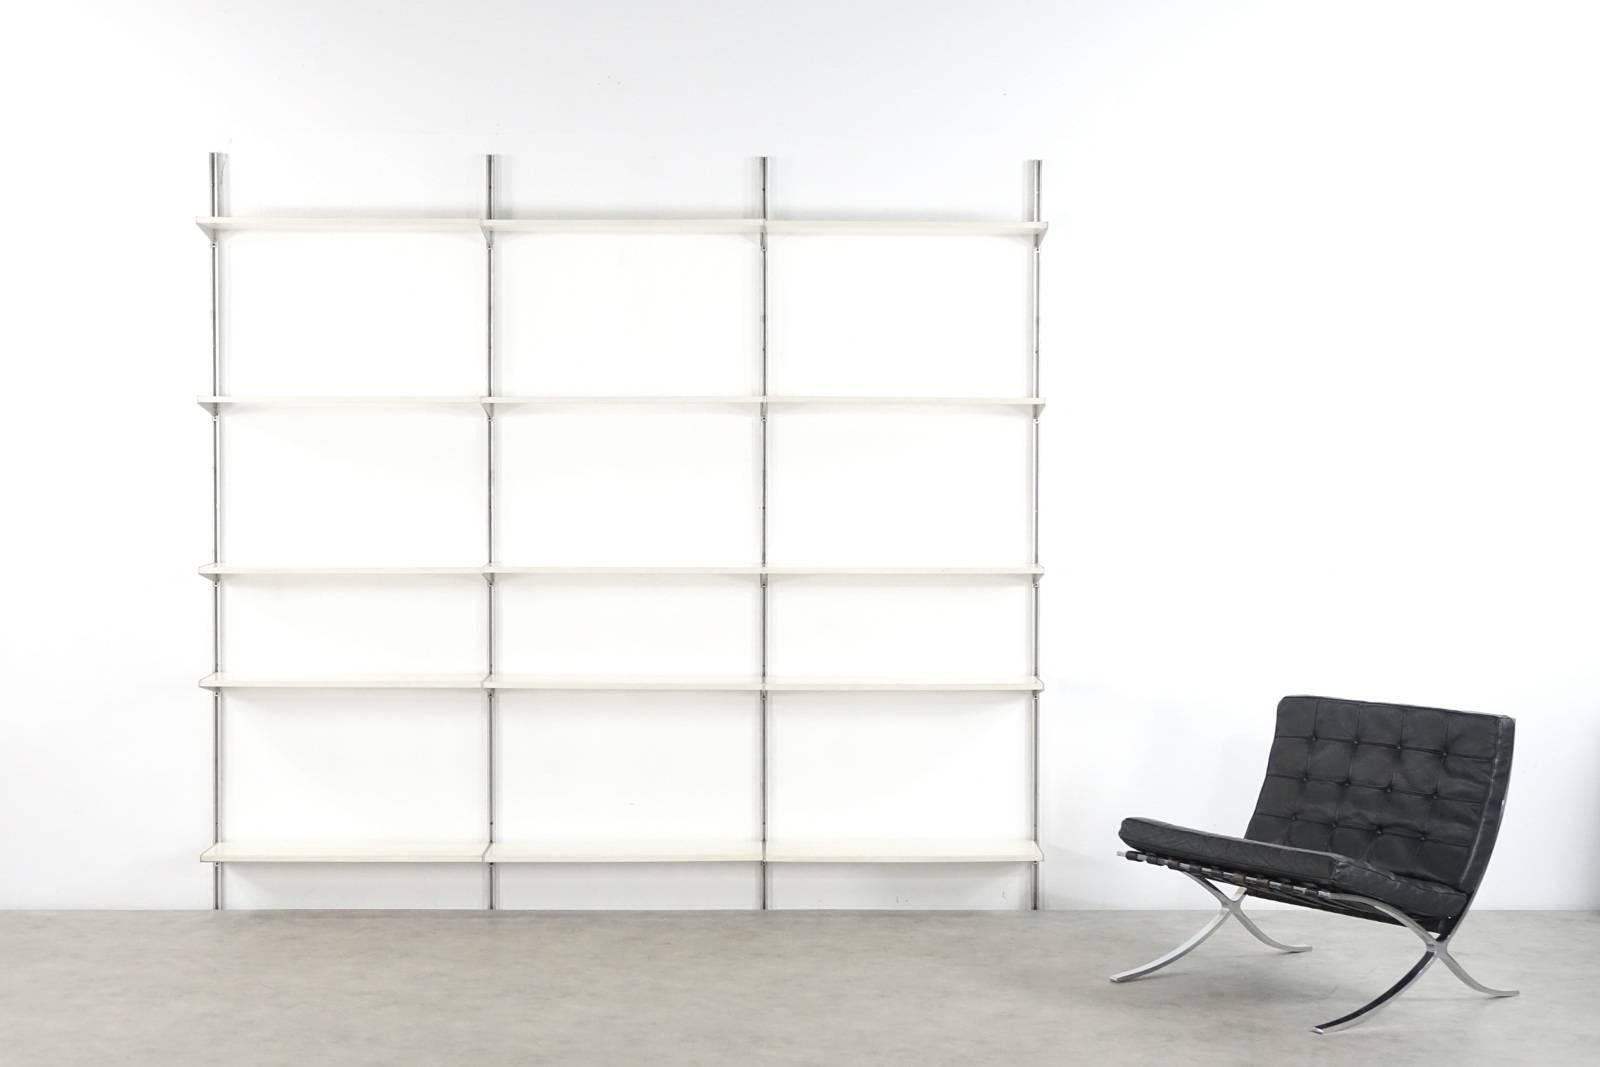 Very rare George Nelson CSS wall unit for Hermann Miller, 1959, CSS (Comprehensive Storage System) off-white modular wall unit or room divider designed by George Nelson for Herman Miller 1957 edited between 1959-1973. 

Measures: 4 wall bars 2.35m